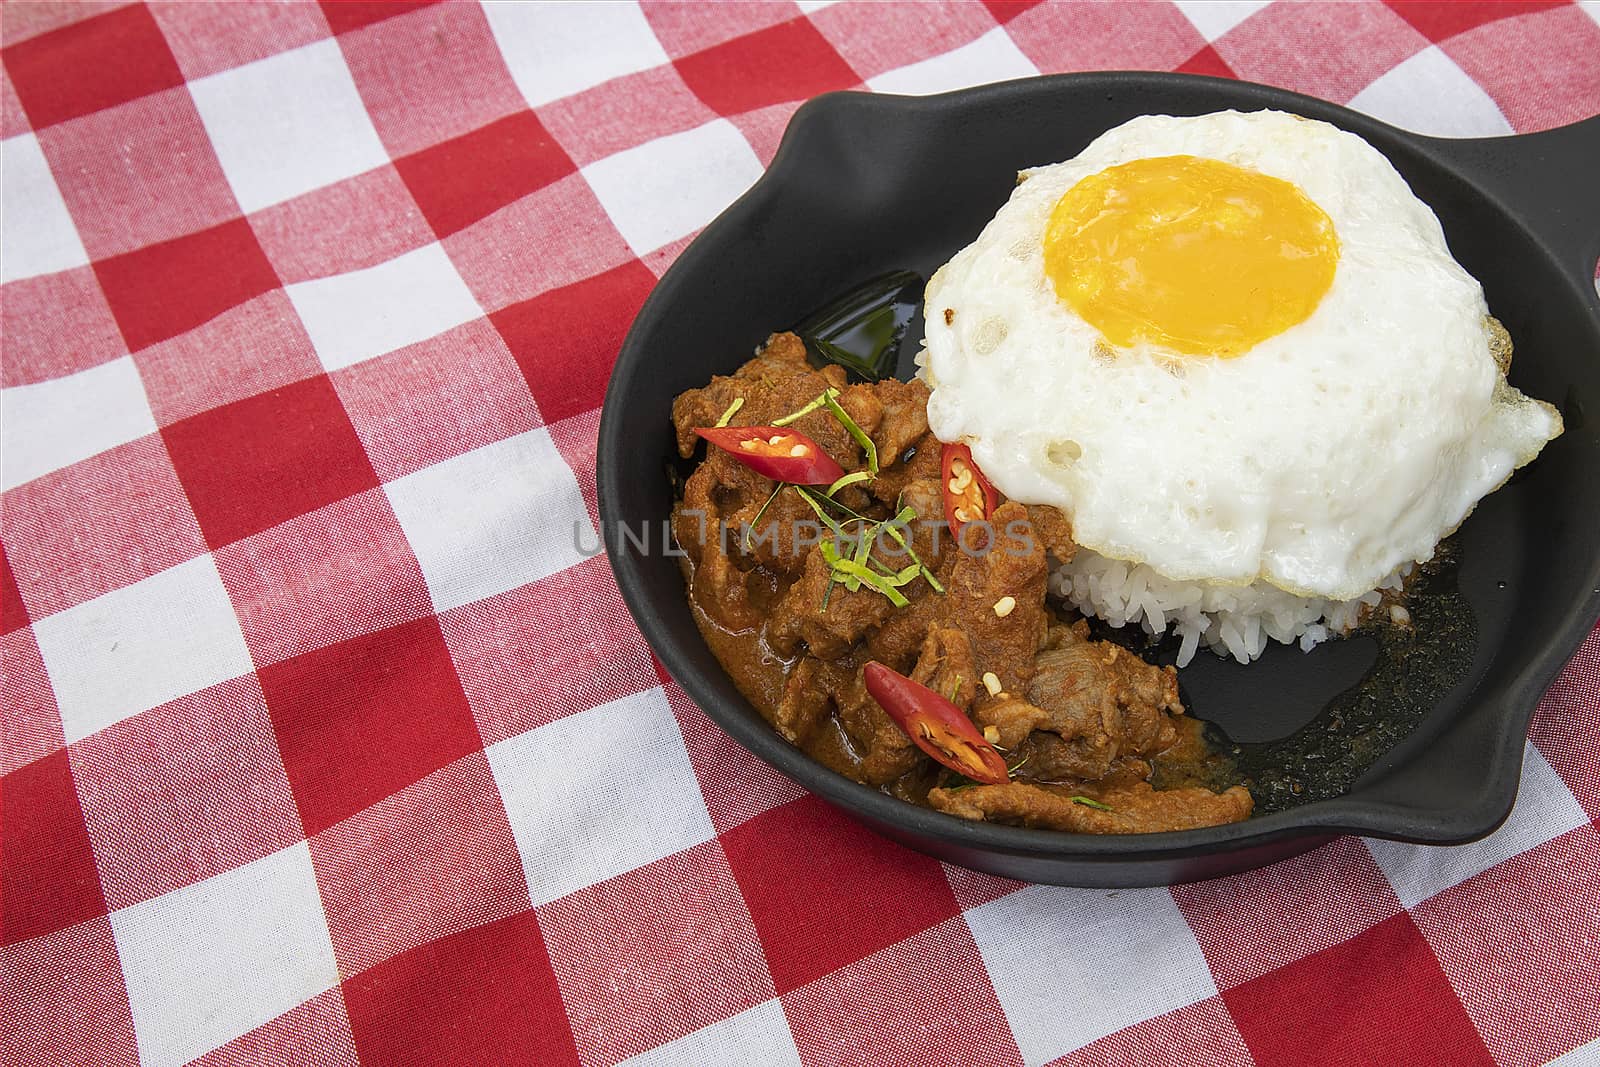 A serving of panang pork, Thai traditional red curry, with rice and fried egg in dark iron pan. Red and white checker pattern cotton cloth background.